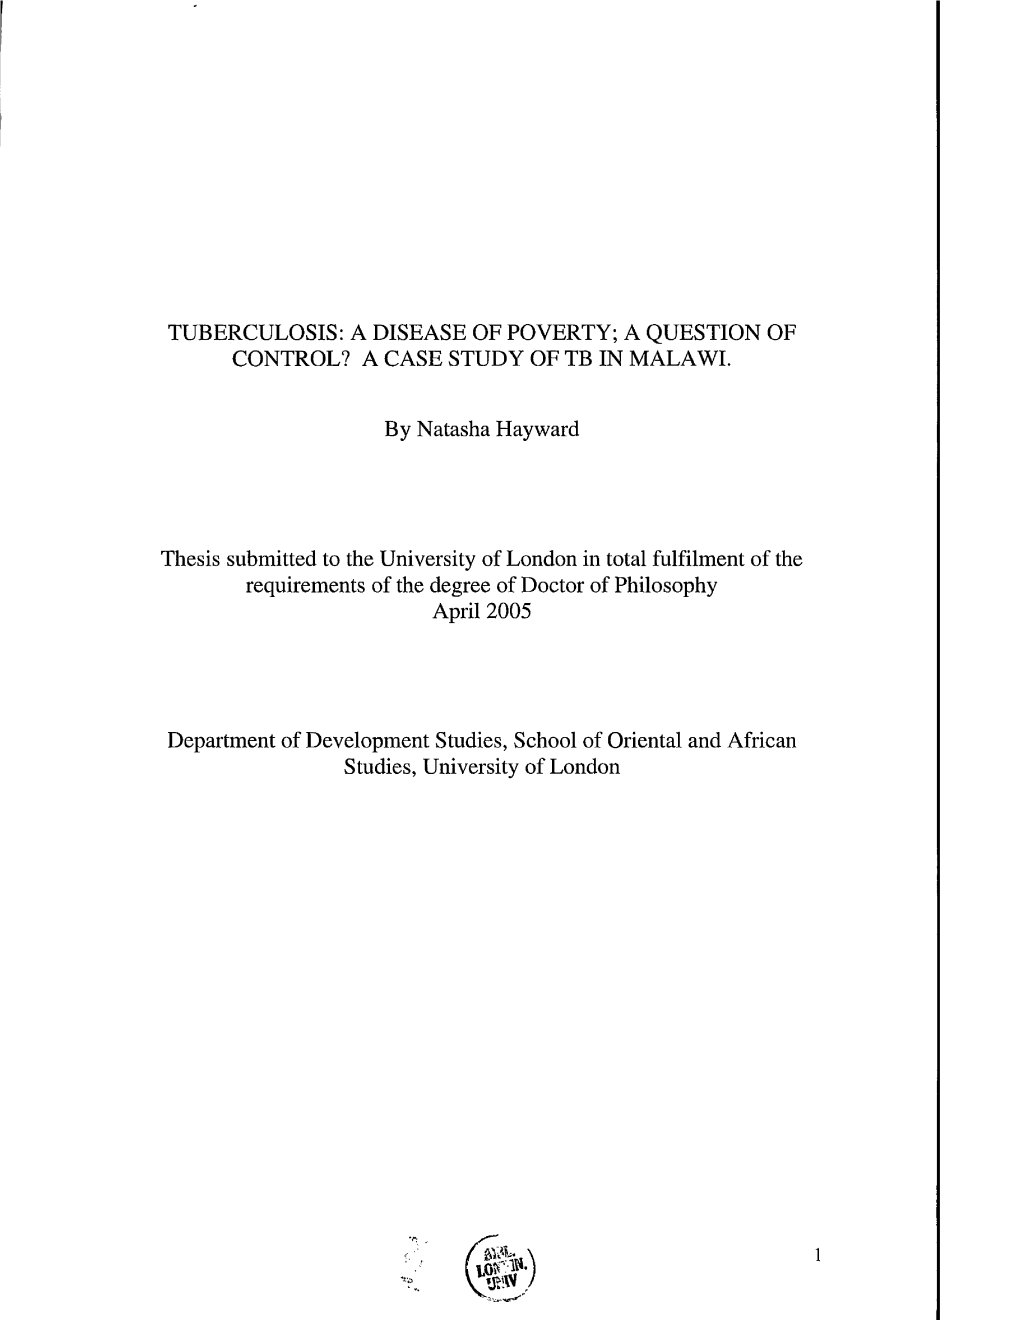 A CASE STUDY of TB in MALAWI. Thesis Submitted to the University of L